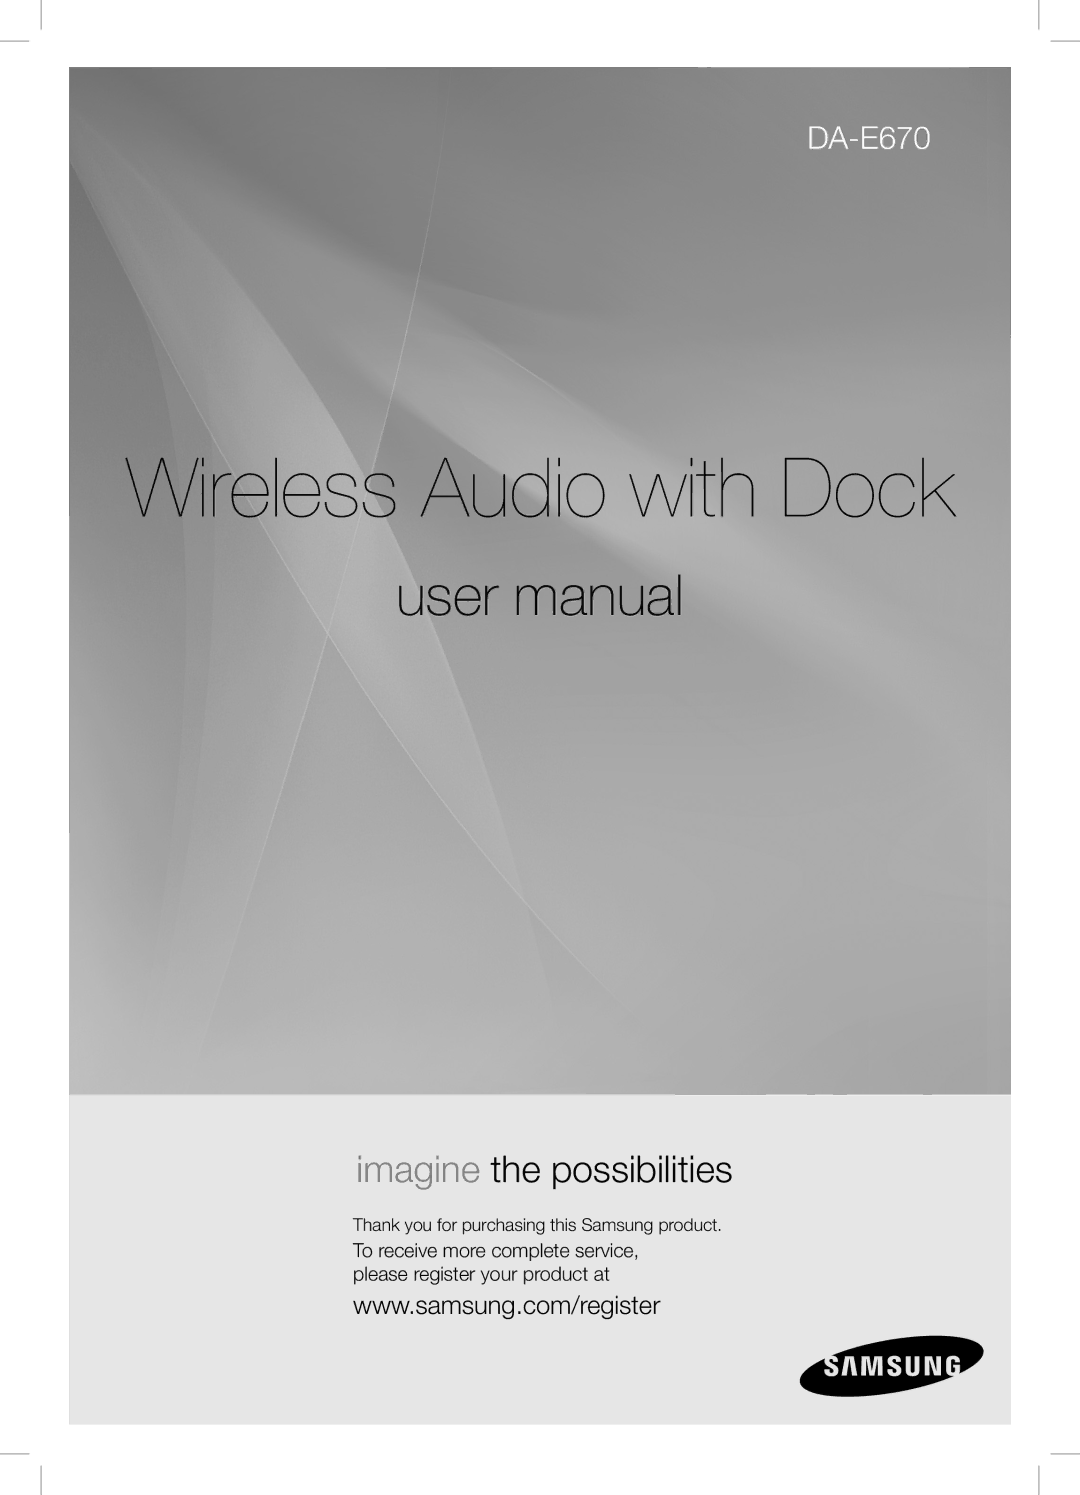 Samsung DAE670ZA, DA-E670 user manual Wireless Audio with Dock, Thank you for purchasing this Samsung product 